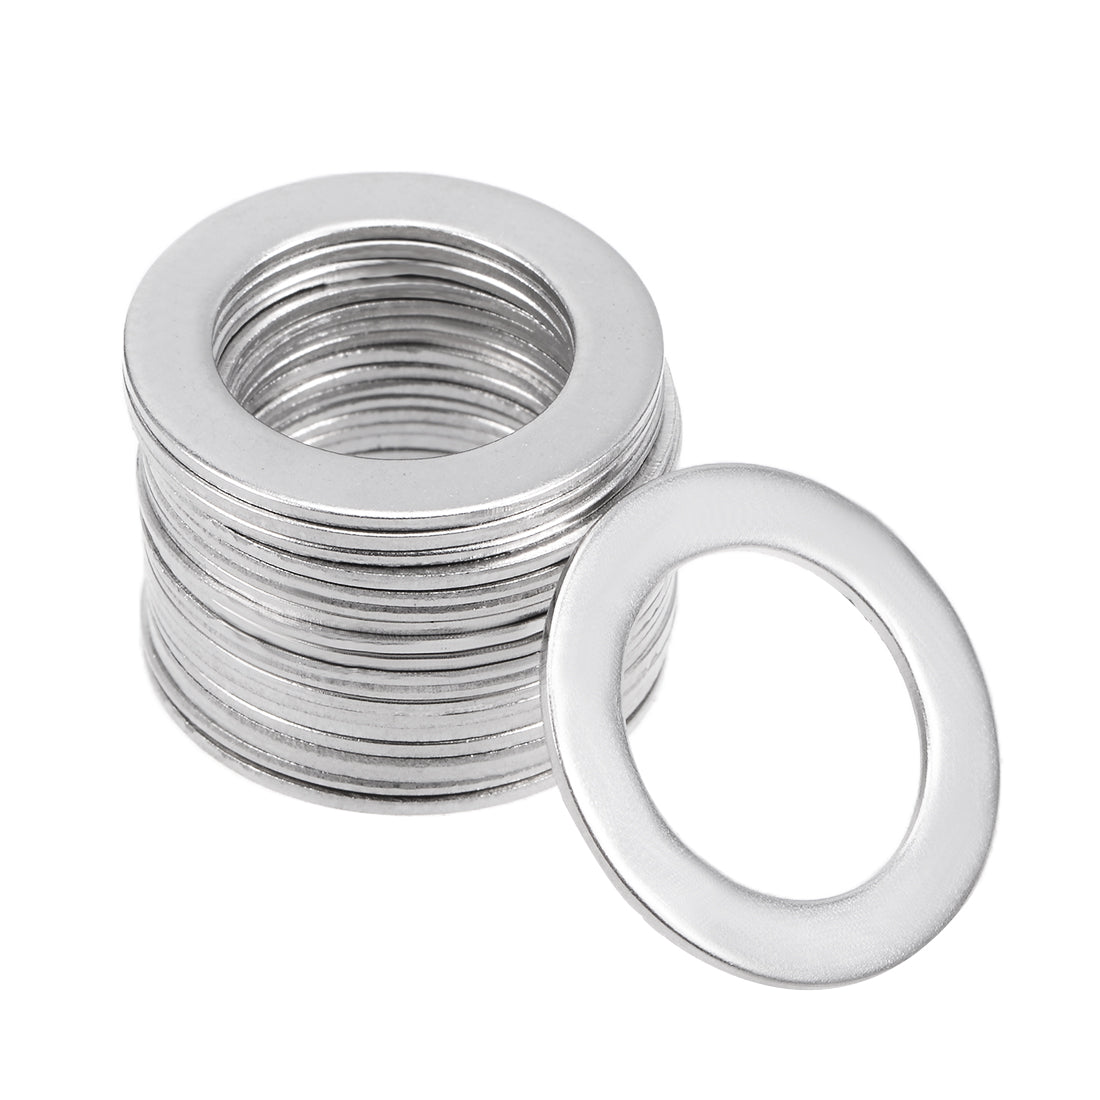 uxcell Uxcell 20 Pcs 20mm x 12mm x 0.8mm 304 Stainless Steel Flat Washer for Screw Bolt